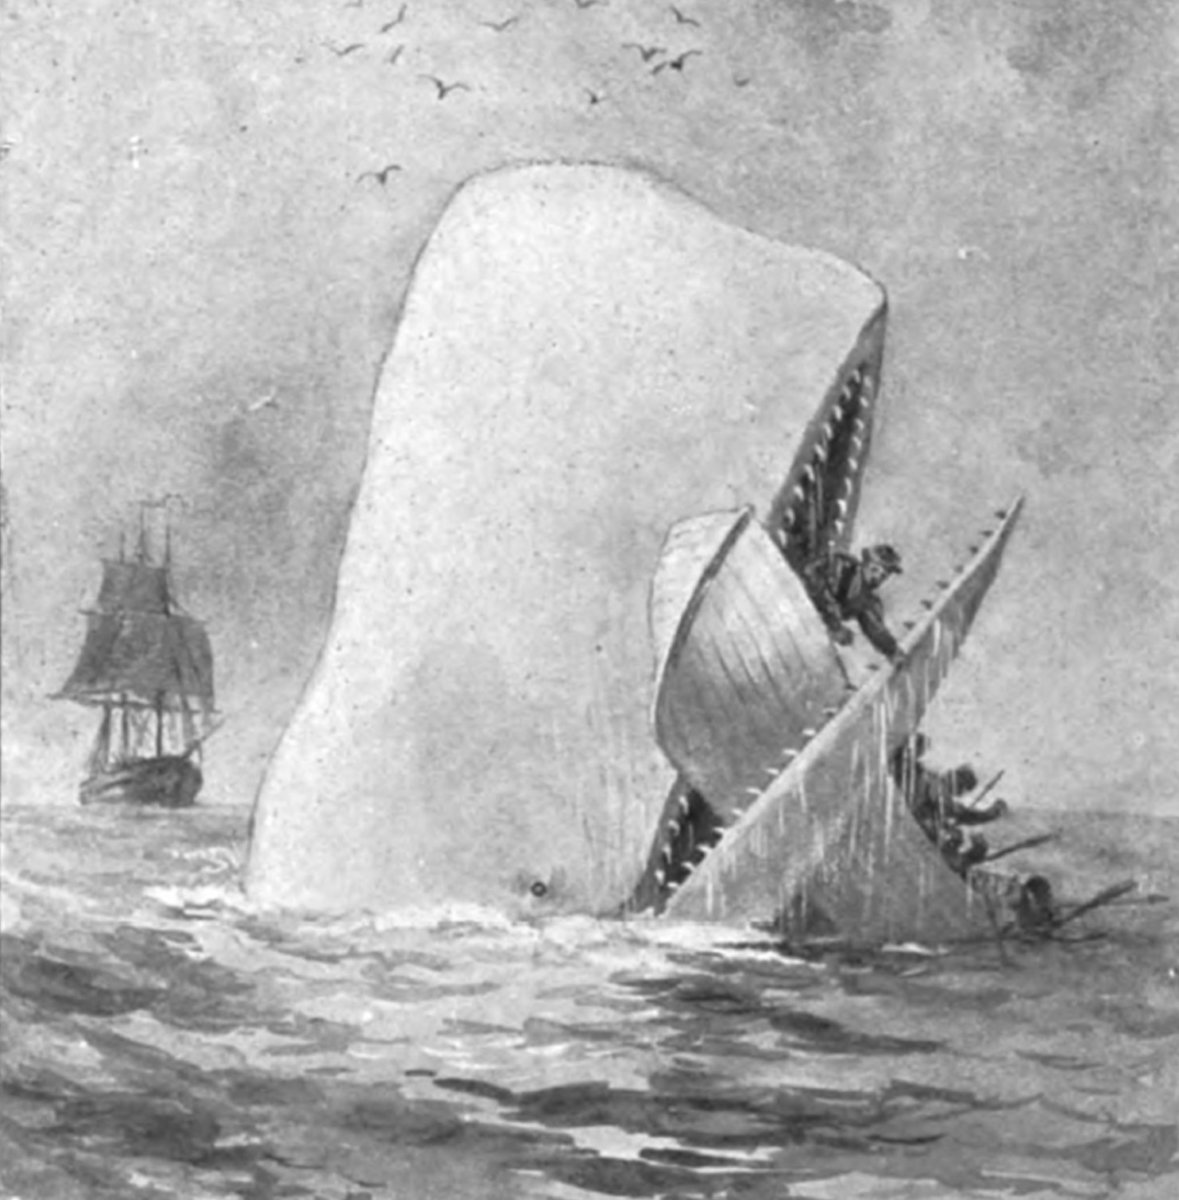 An illustrated page out of "Moby Dick"